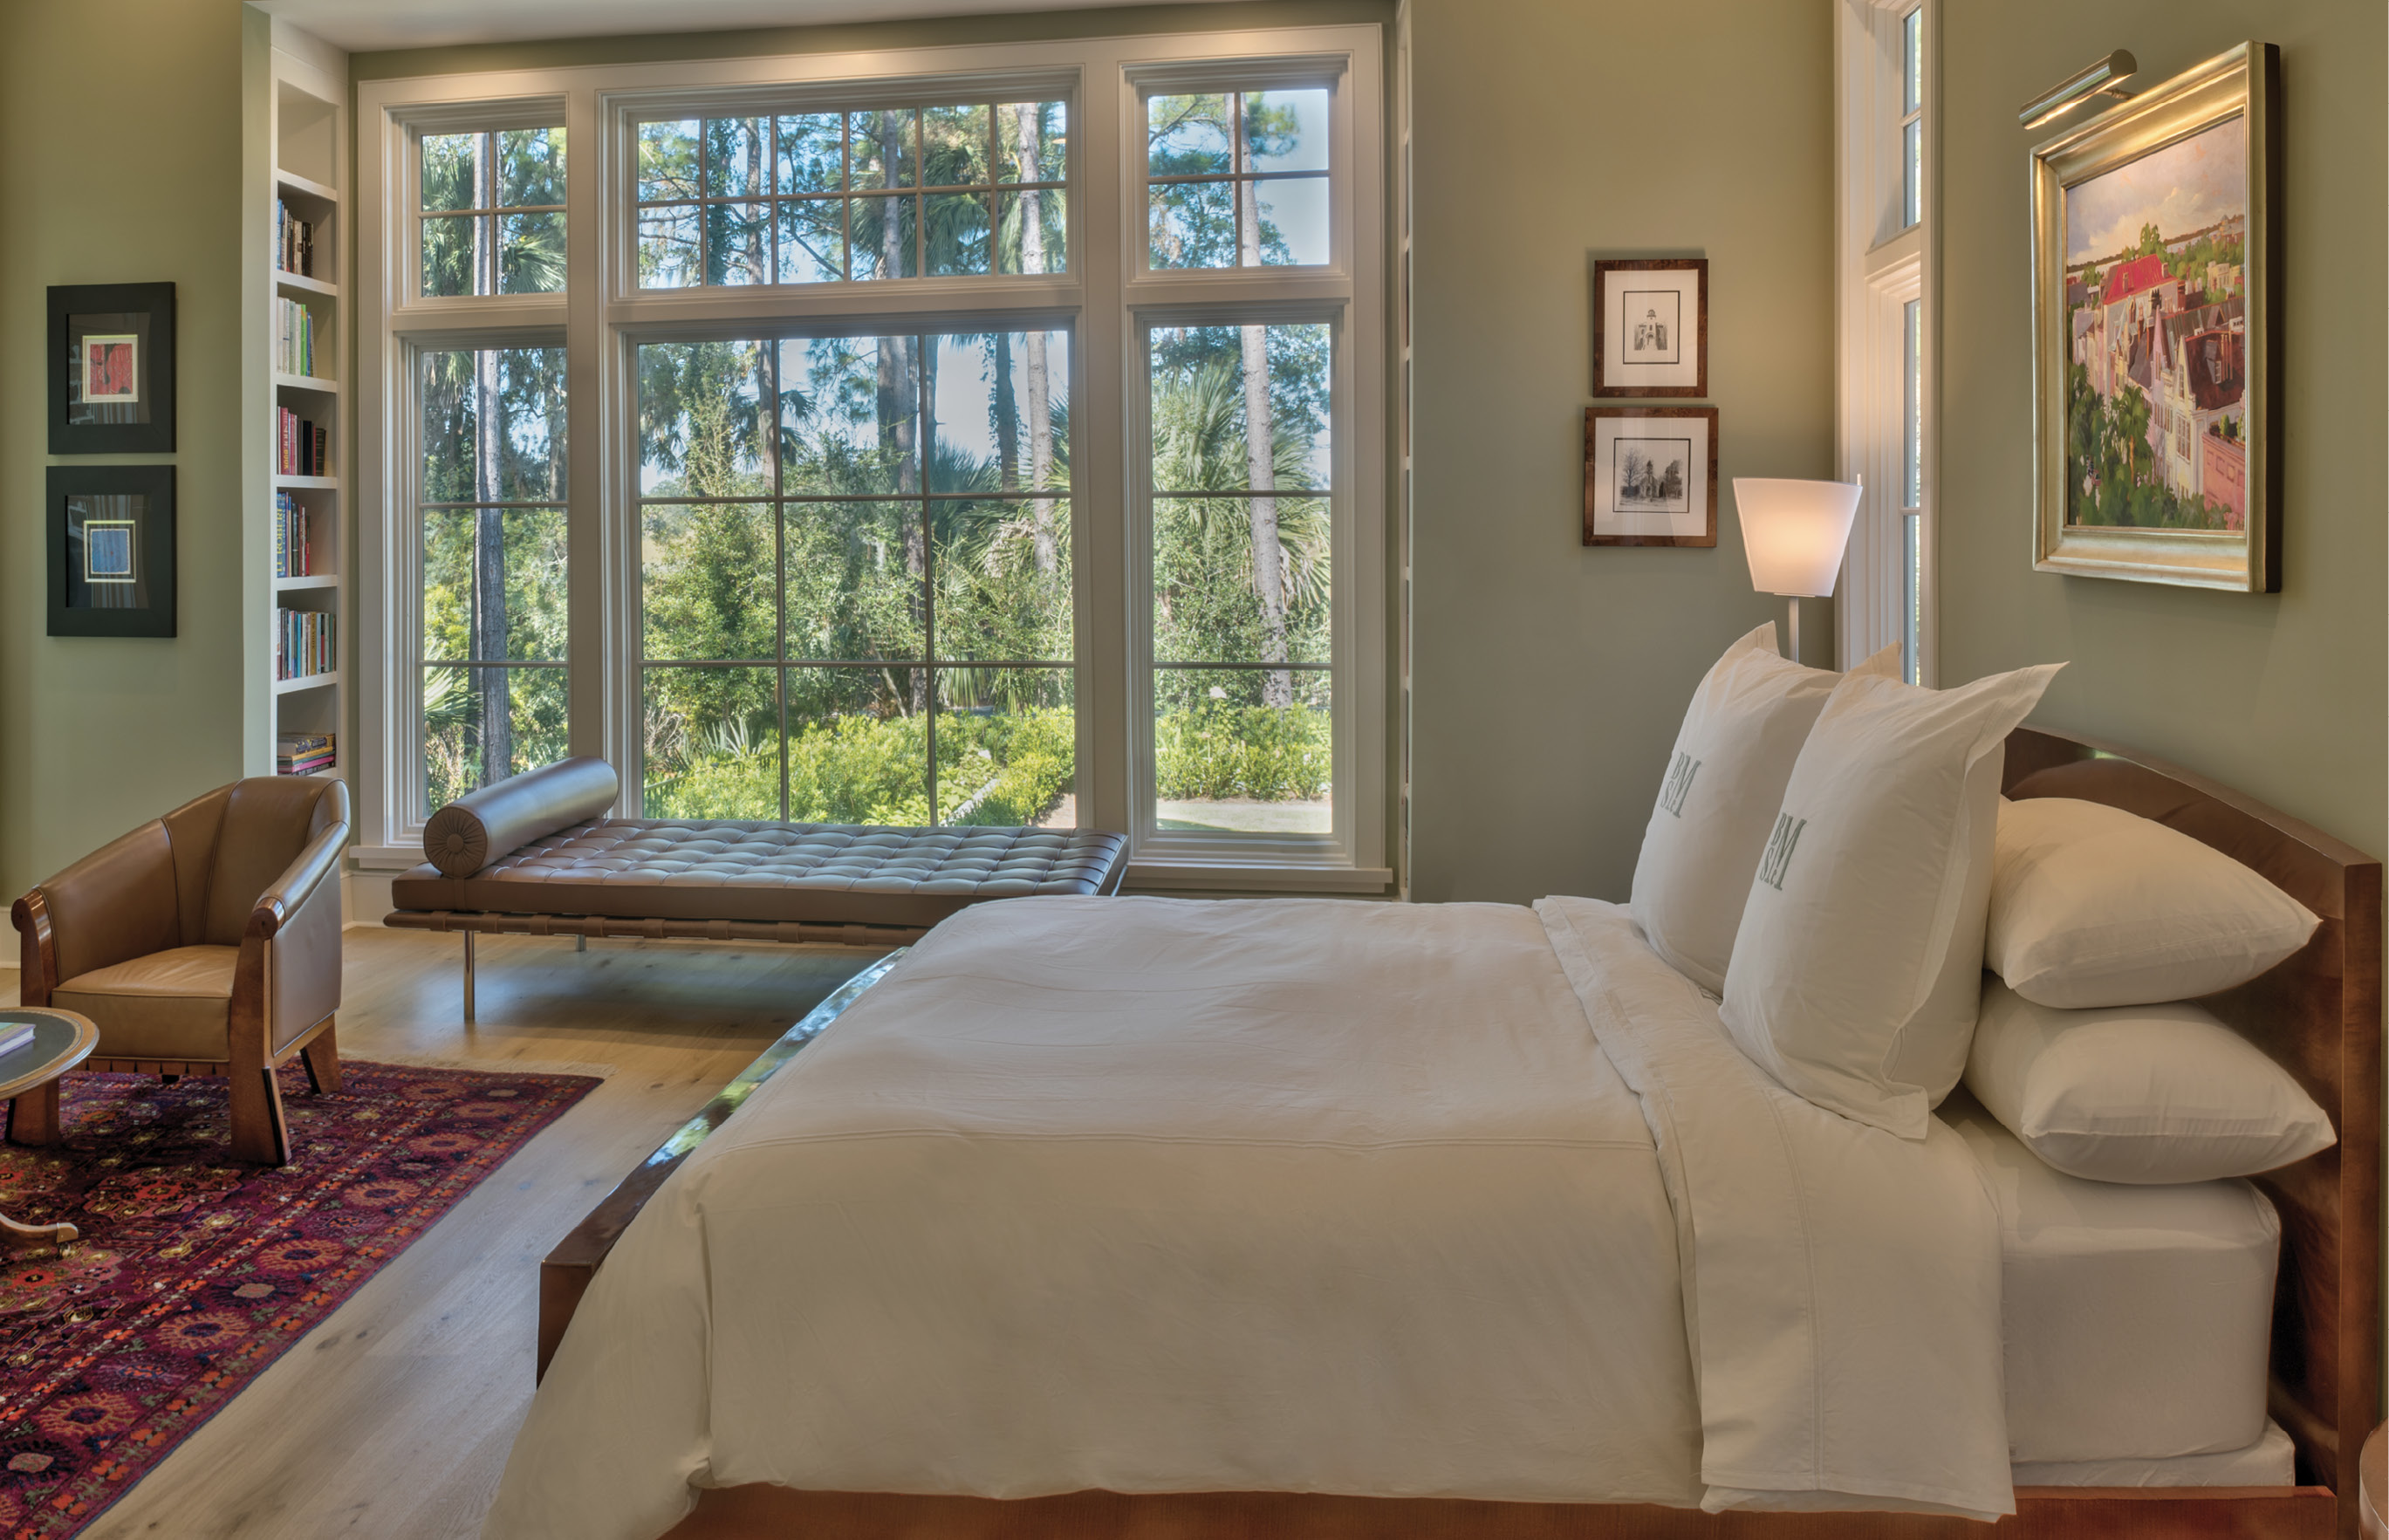 TRANQUIL RETREAT: Walls throughout the home are white, except for the soothing seafoam green in the master suite. With windows on three sides, the master gets plenty of soft light; “the beauty when the sun is coming up is very special,” the wife says.